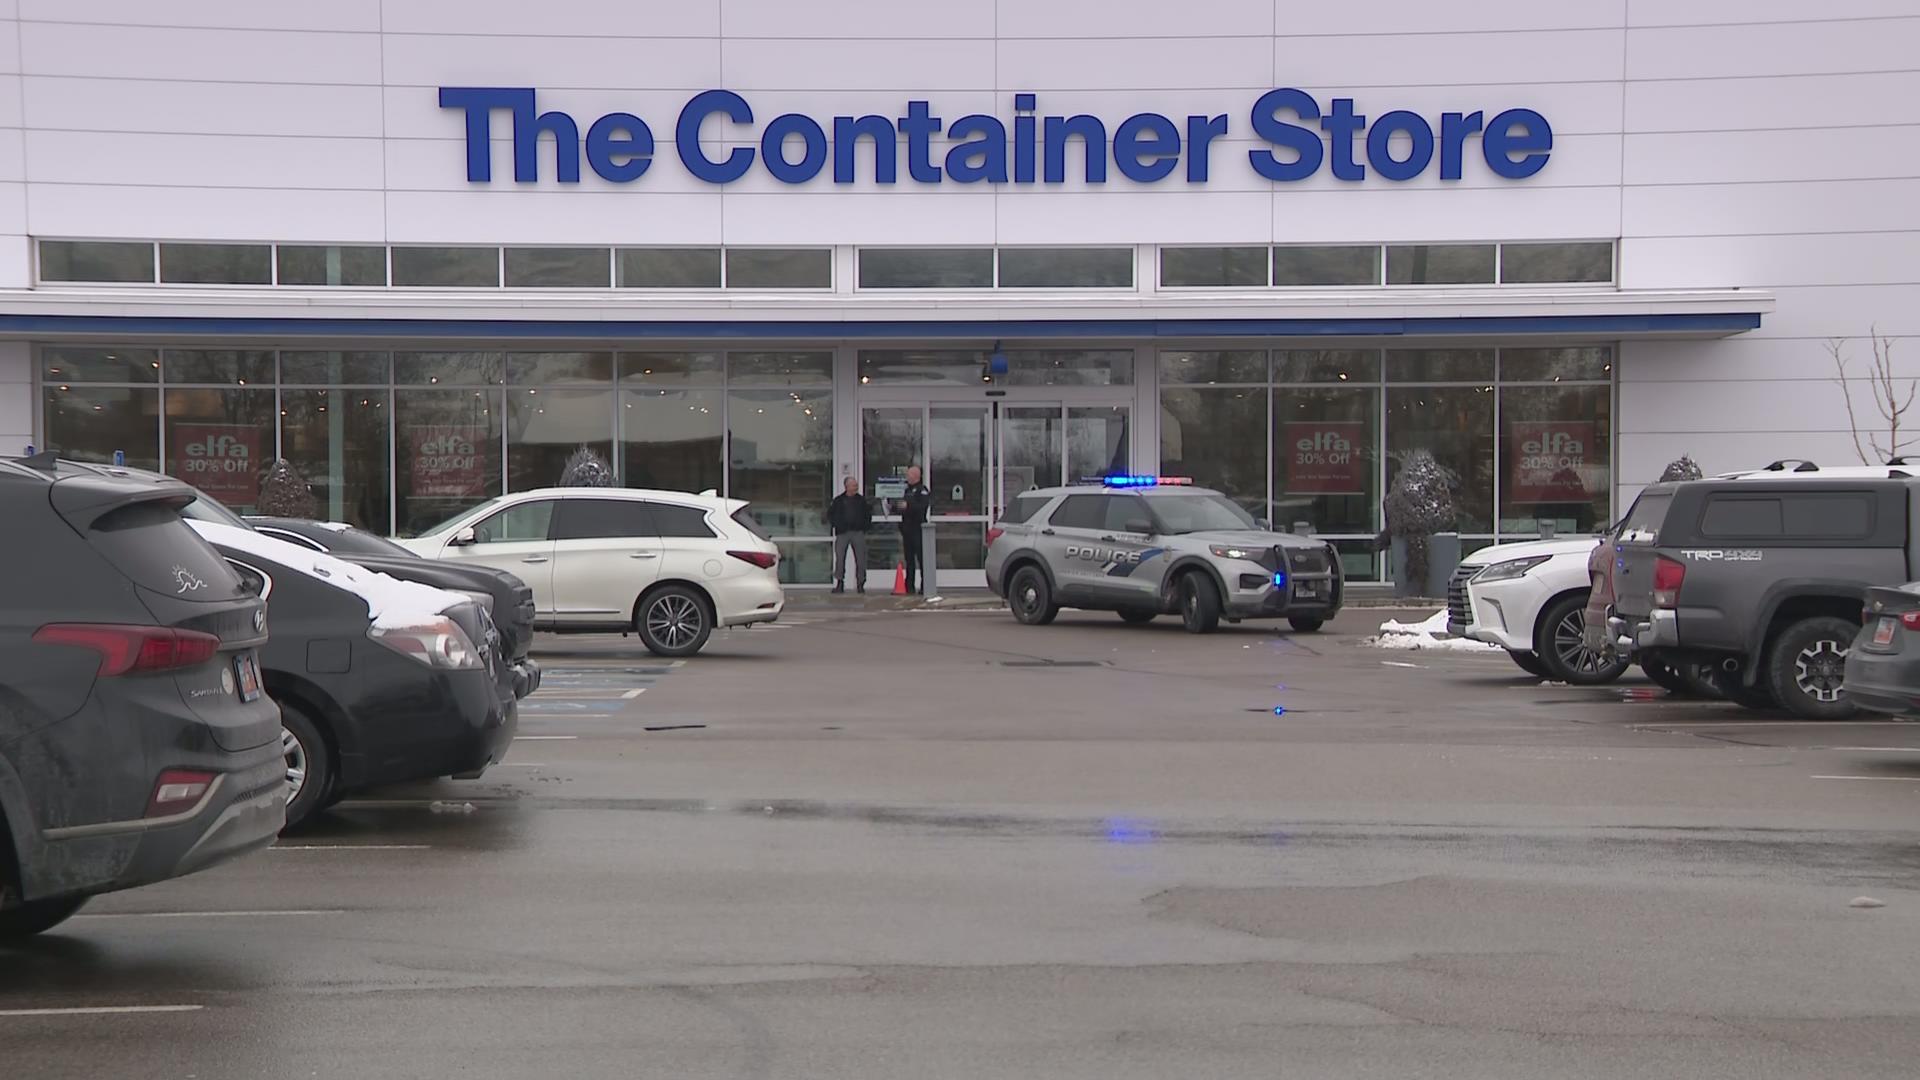 The Container Store at Fashion Place Mall in Murray where the reported shooting occurred....